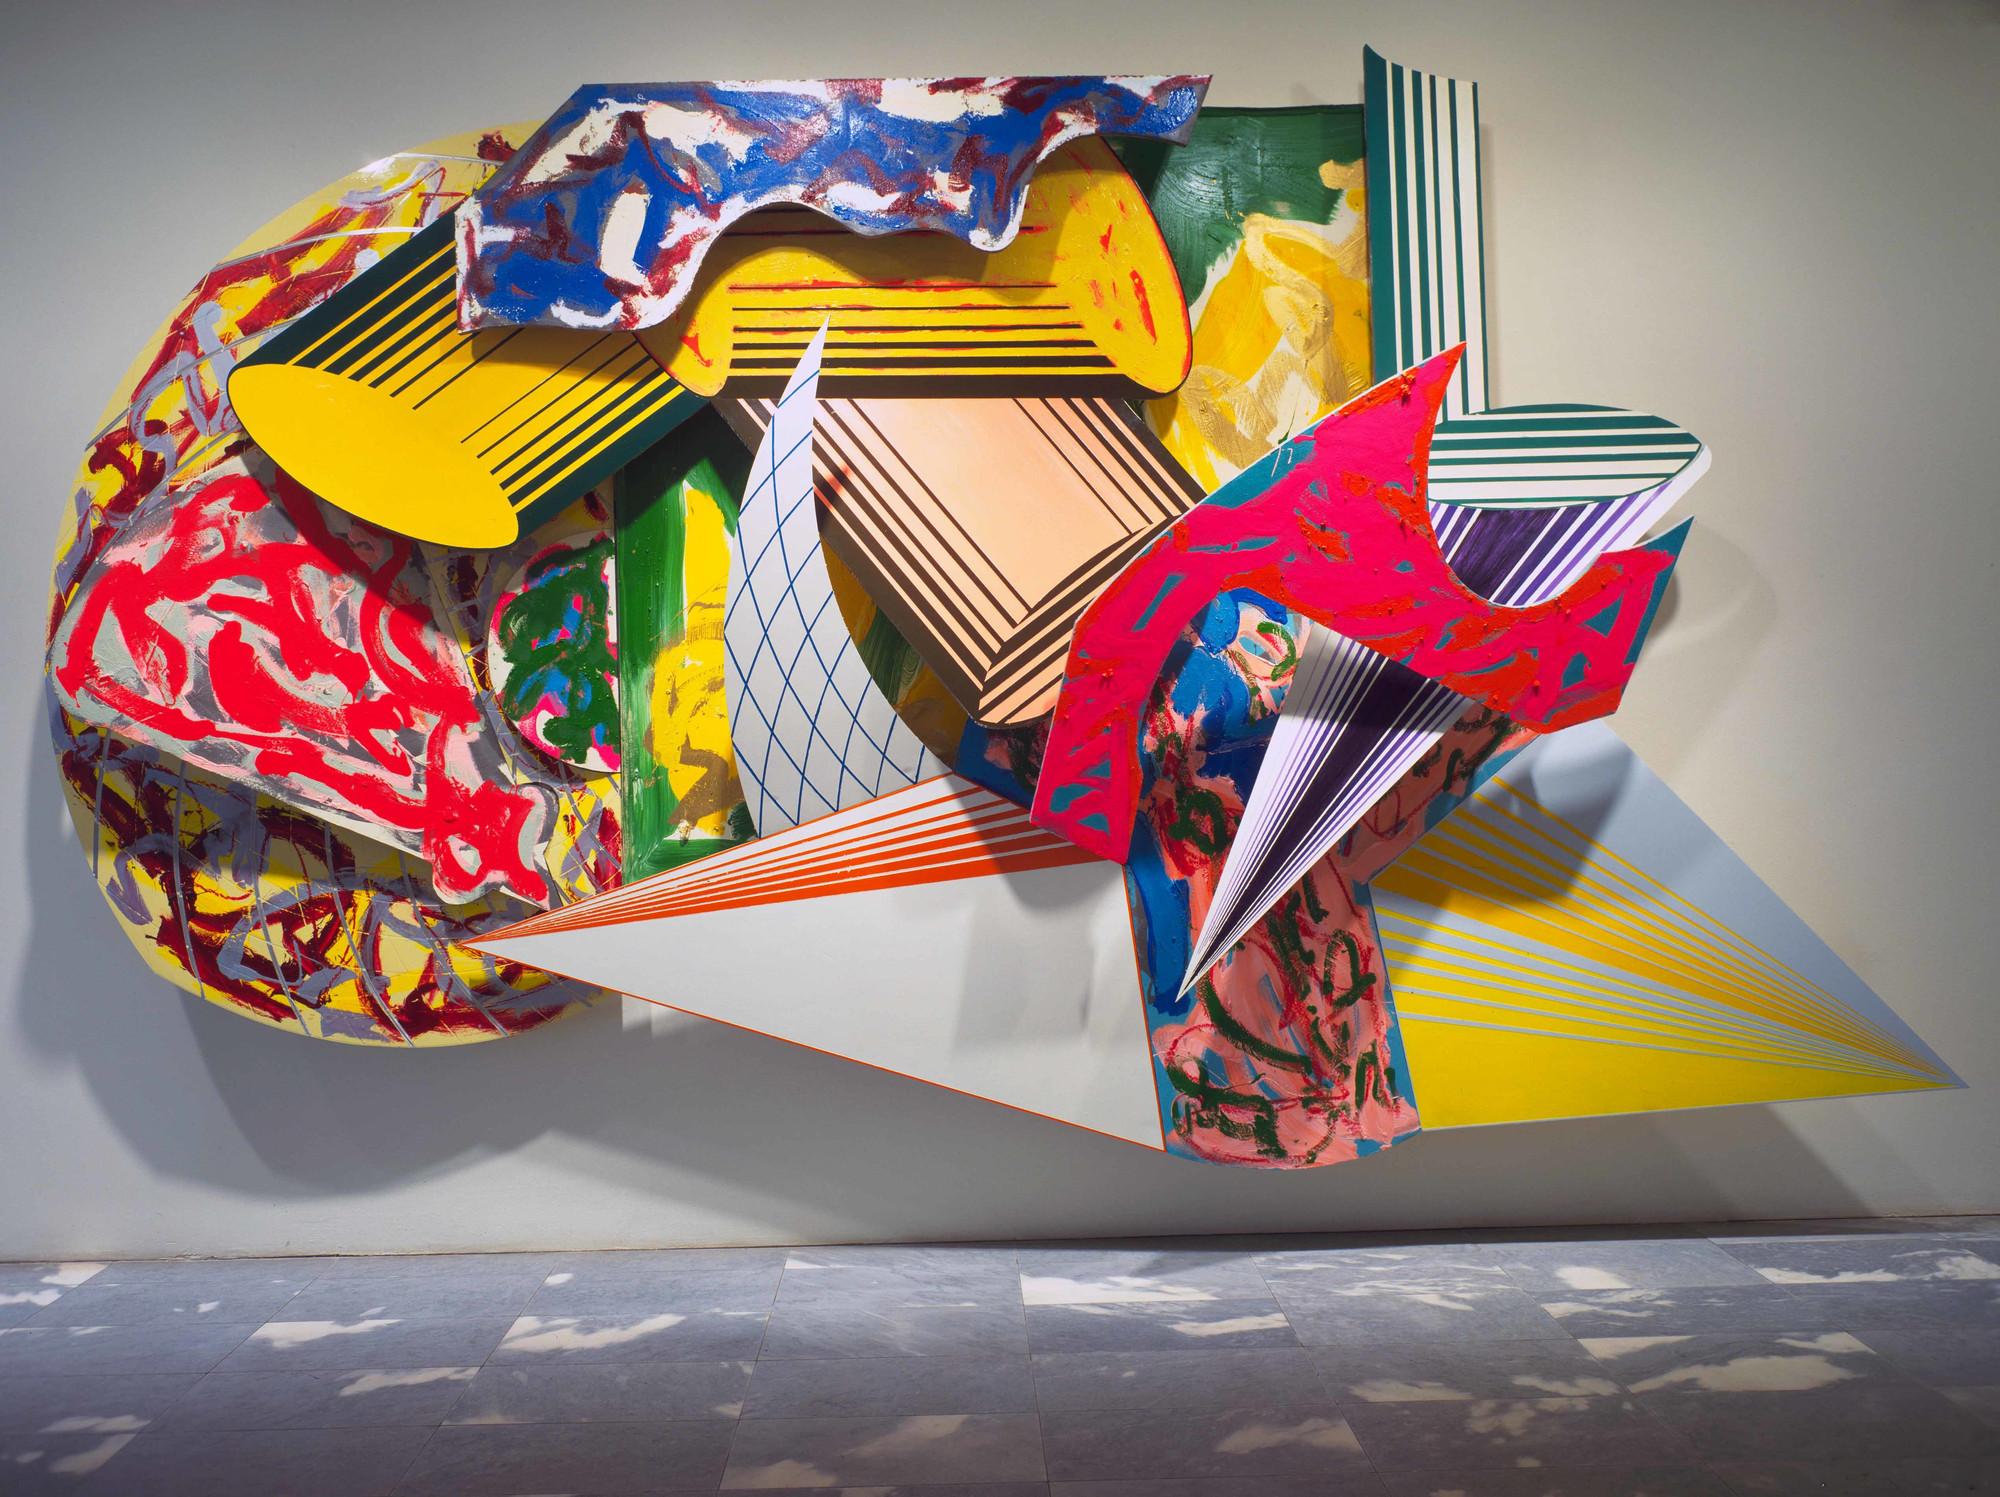 Frank Stella. <em>GiufÃ , la luna, i ladri e le guardie.</em> 1984. Synthetic polymer paint, oil, urethane enamel, fluorescent alkyd, and printing ink on canvas, and etched magnesium, aluminum, and fiberglass. The Museum of Modern Art, New York. Acquired through the James Thrall Soby Bequest. Â© 2018 Frank Stella / Artists Rights Society (ARS), New York
